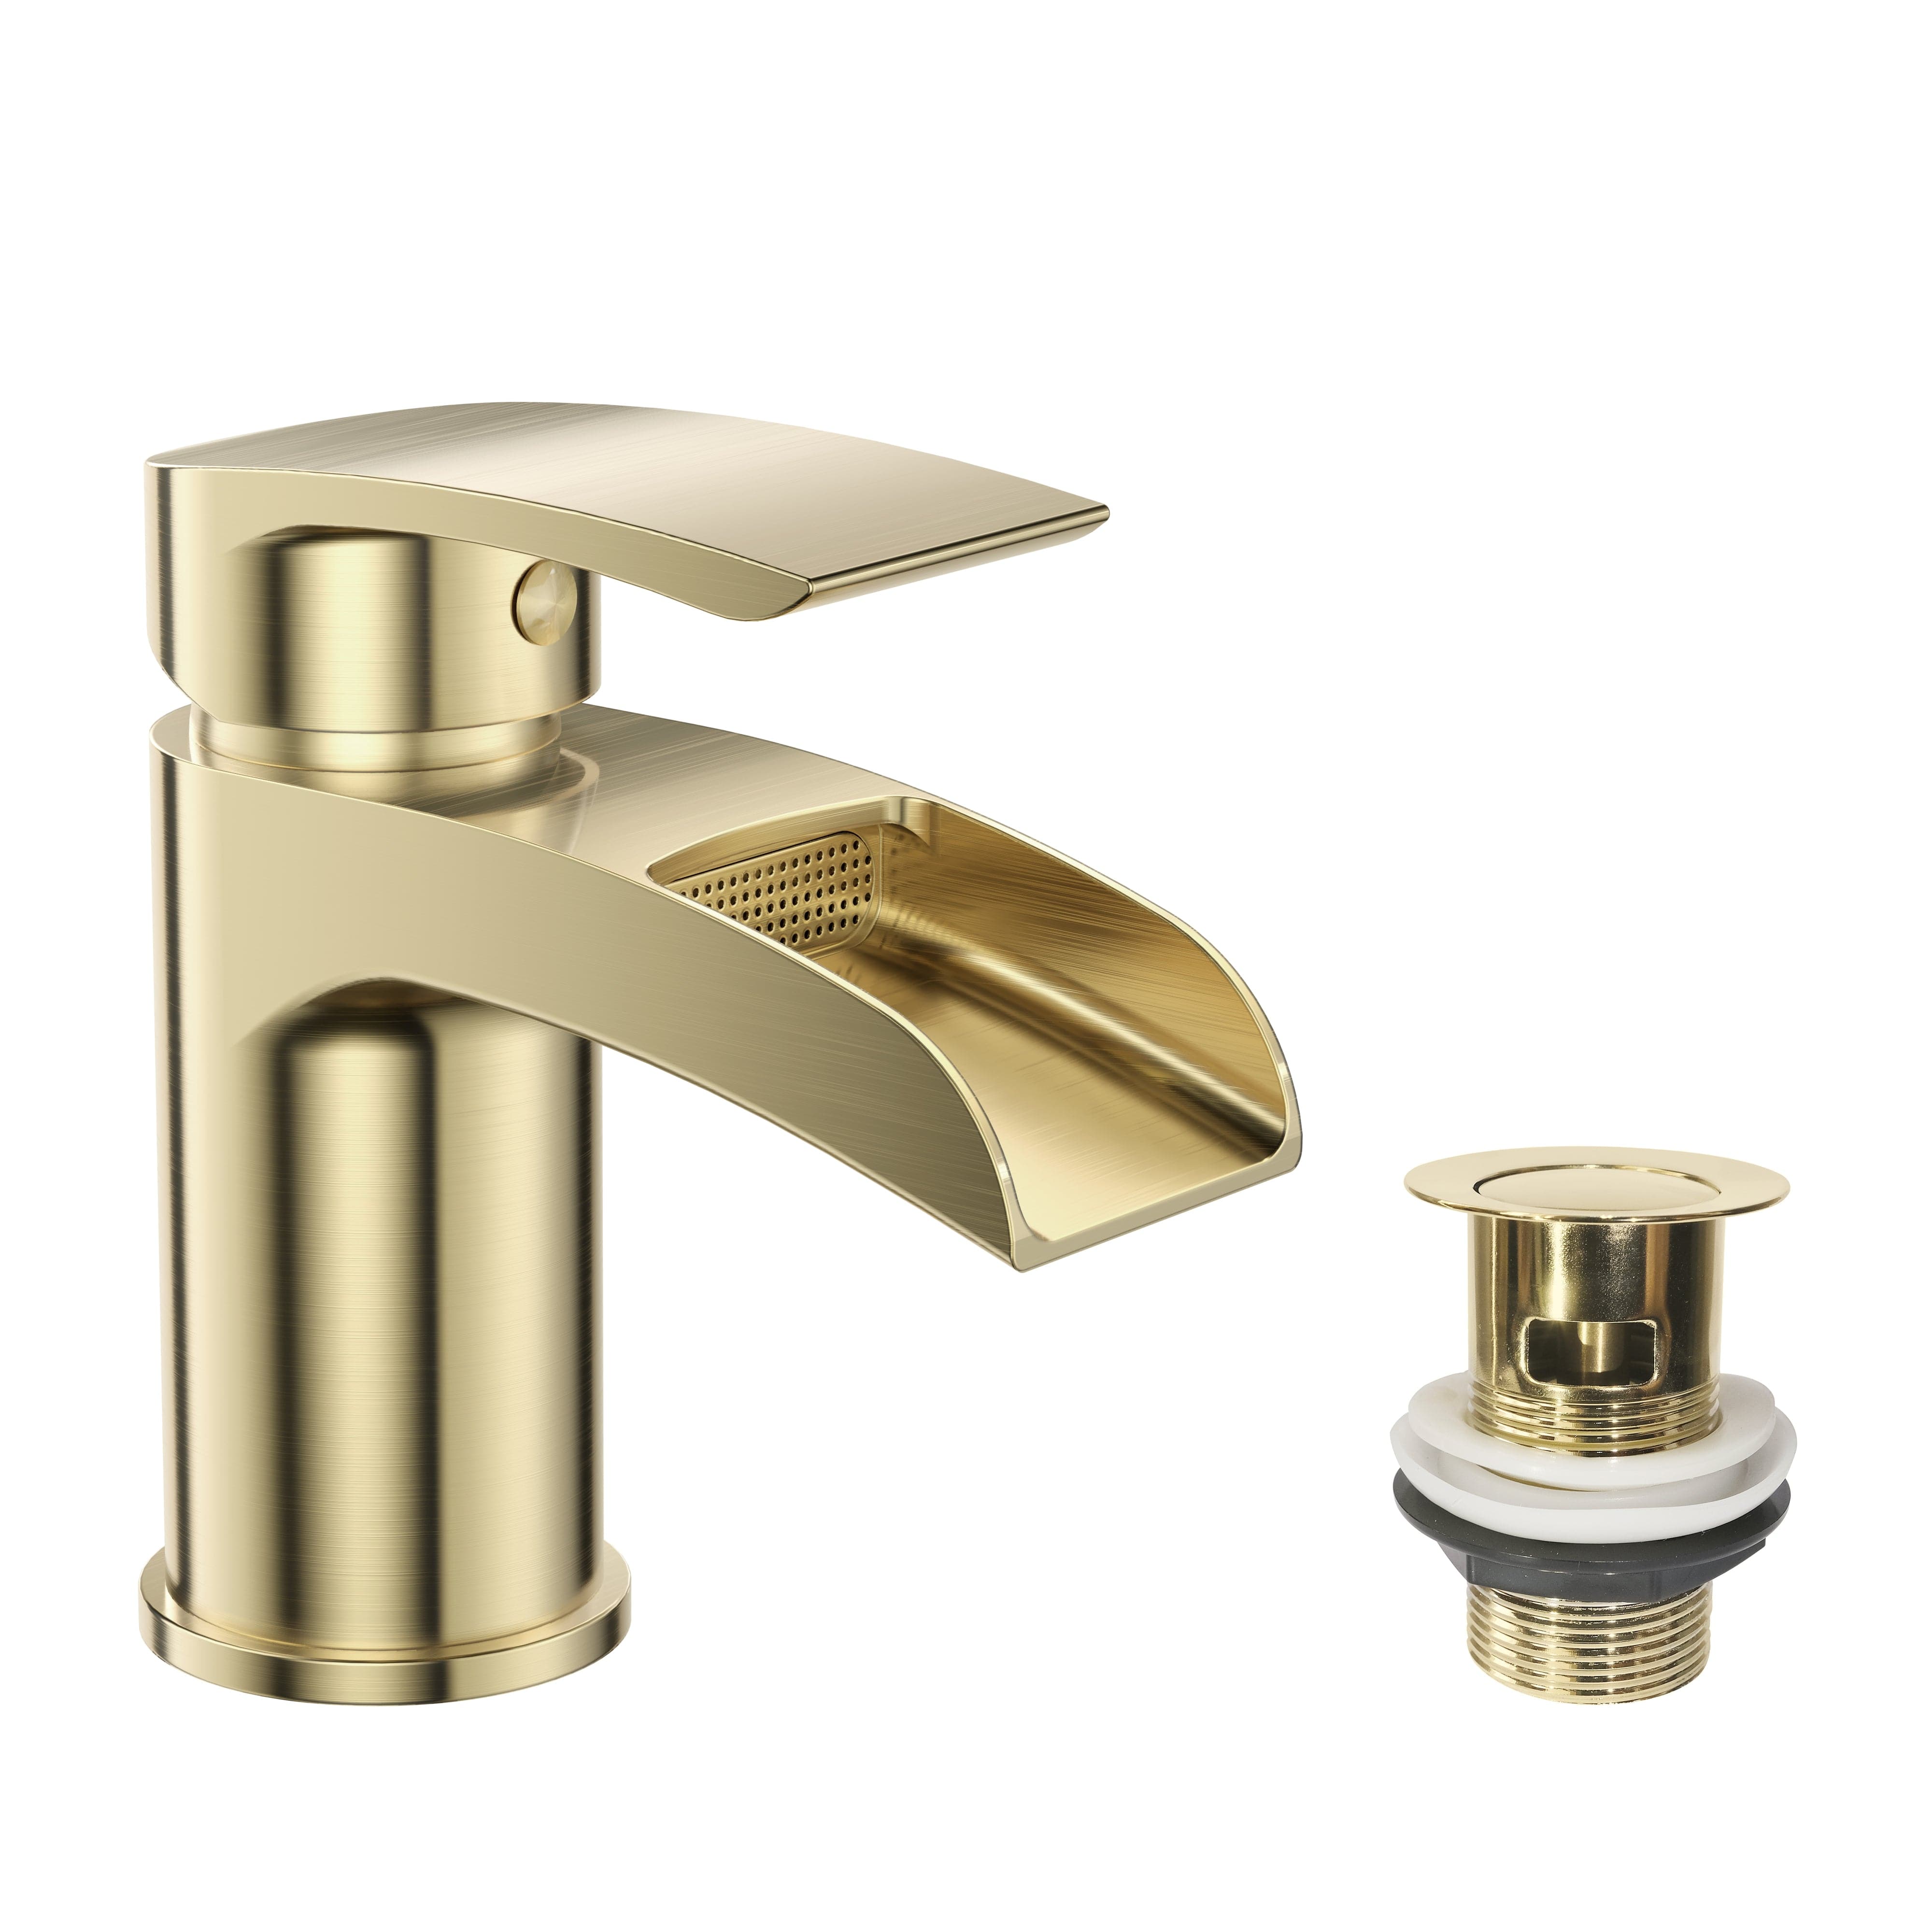 Symphony Round Waterfall Mono Basin Mixer Tap with Waste - Brushed Brass